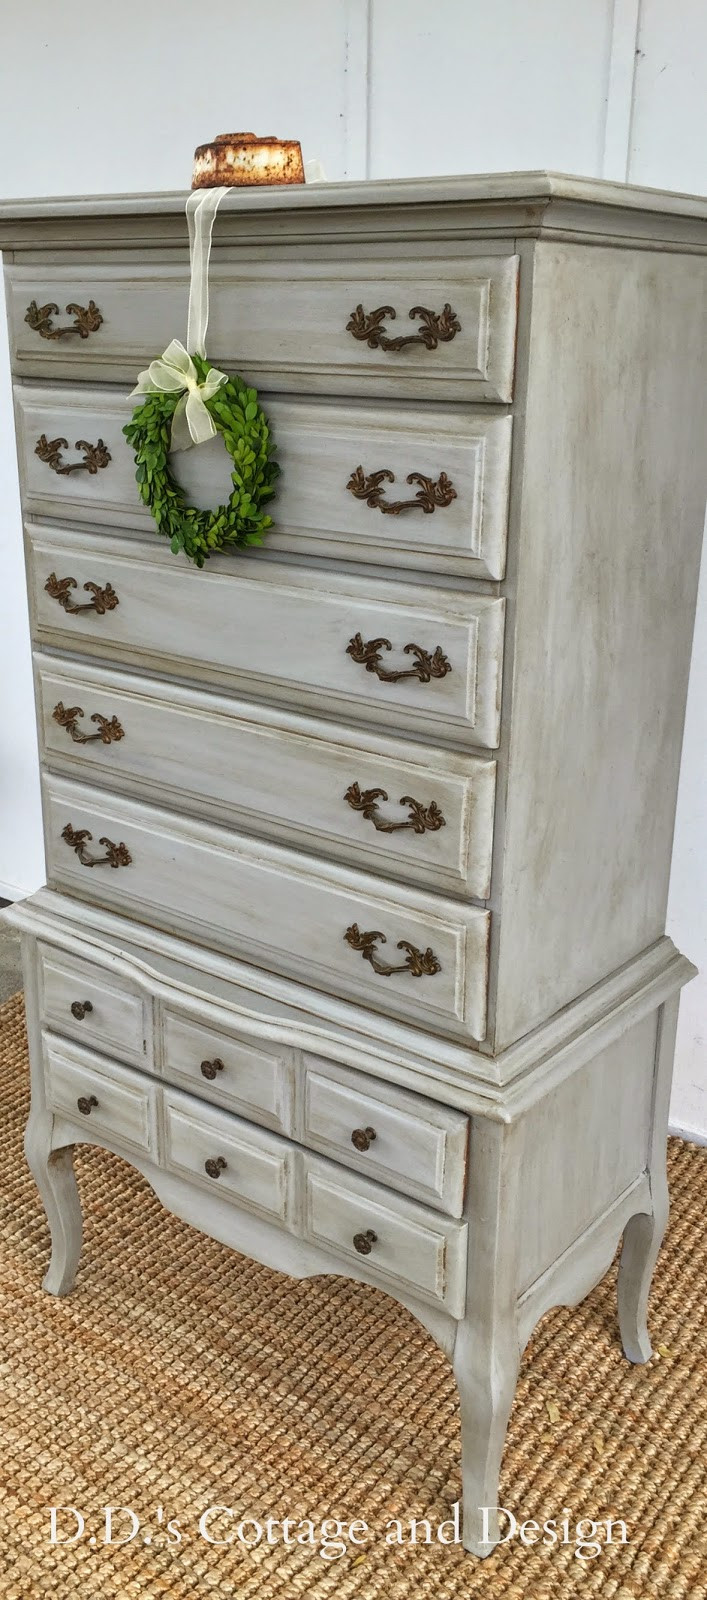 Painted Bedroom Furniture
 D D s Cottage and Design Grey French Provincial Chest on